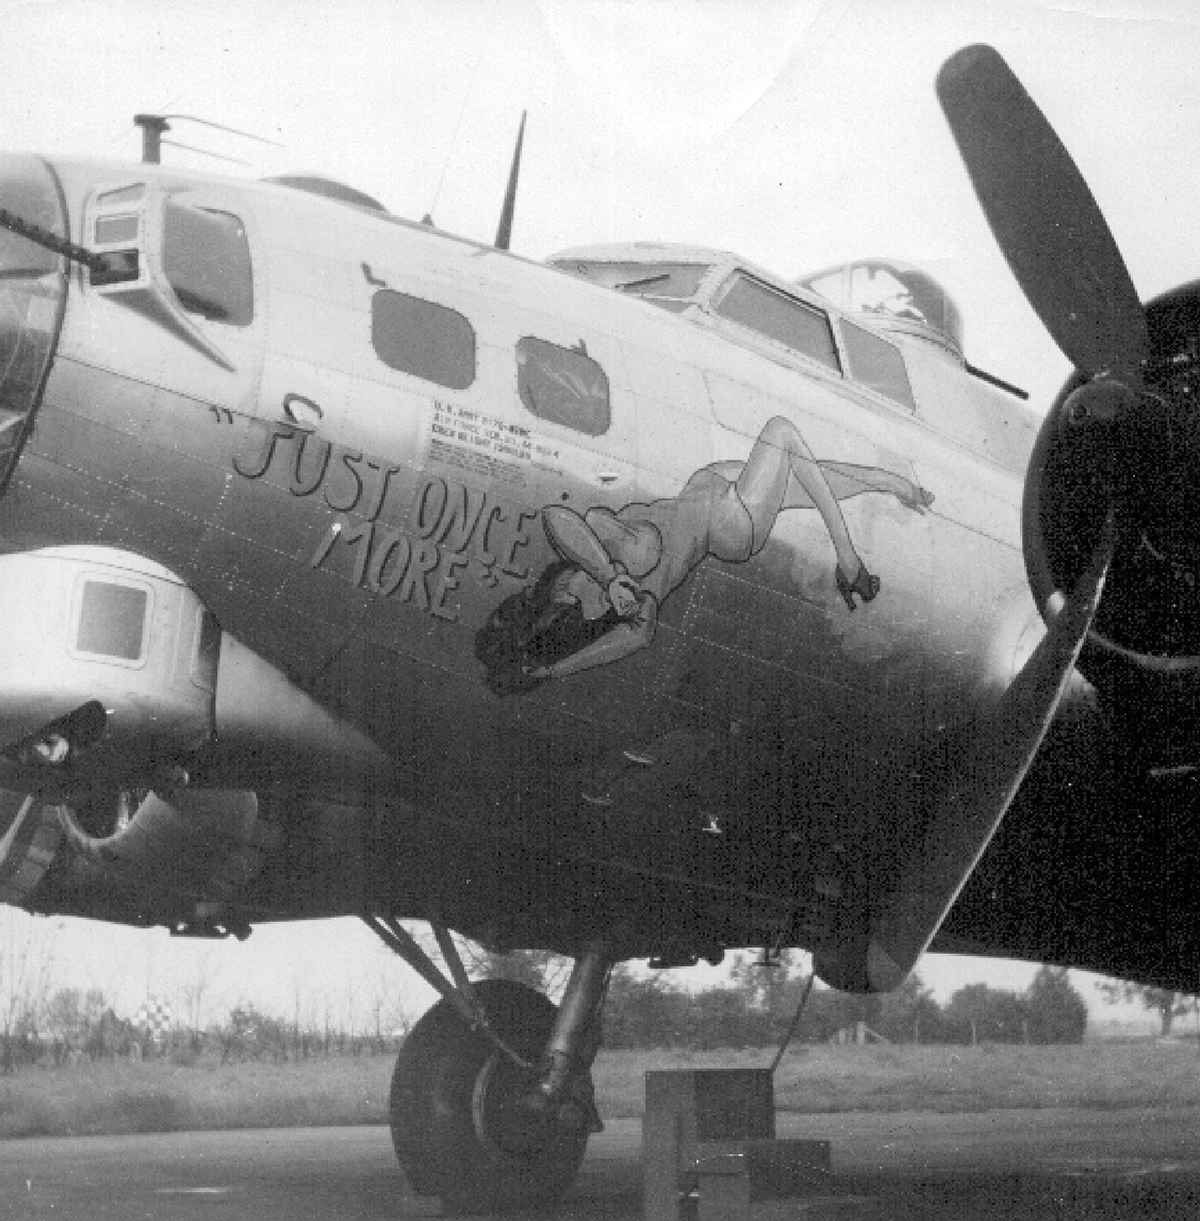 B-17 #44-8854 / Just Once More